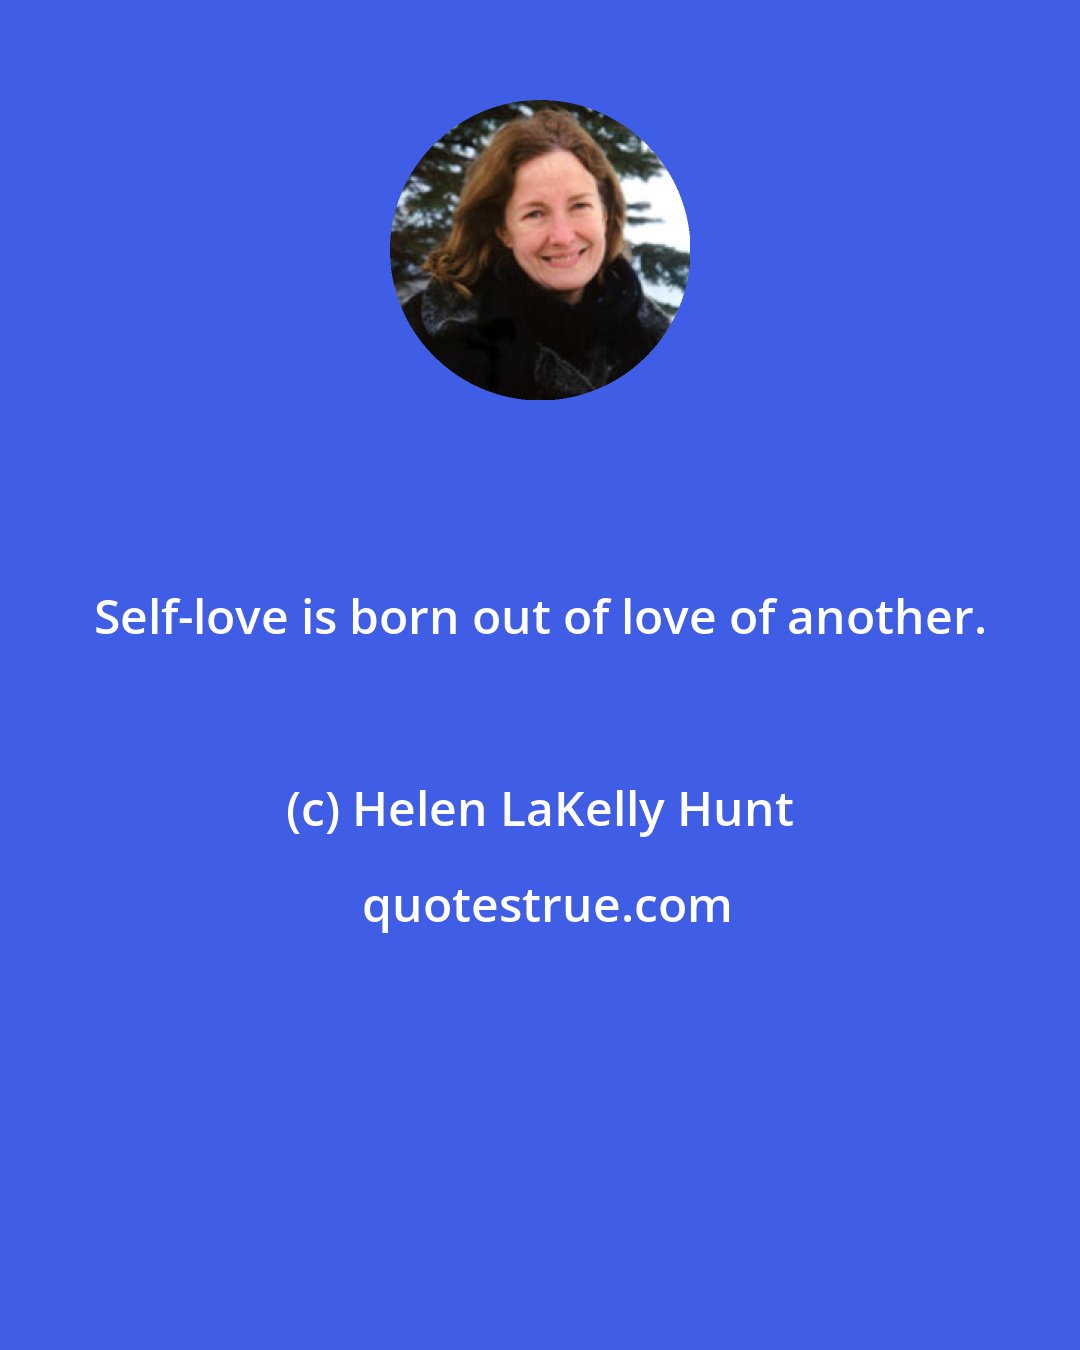 Helen LaKelly Hunt: Self-love is born out of love of another.